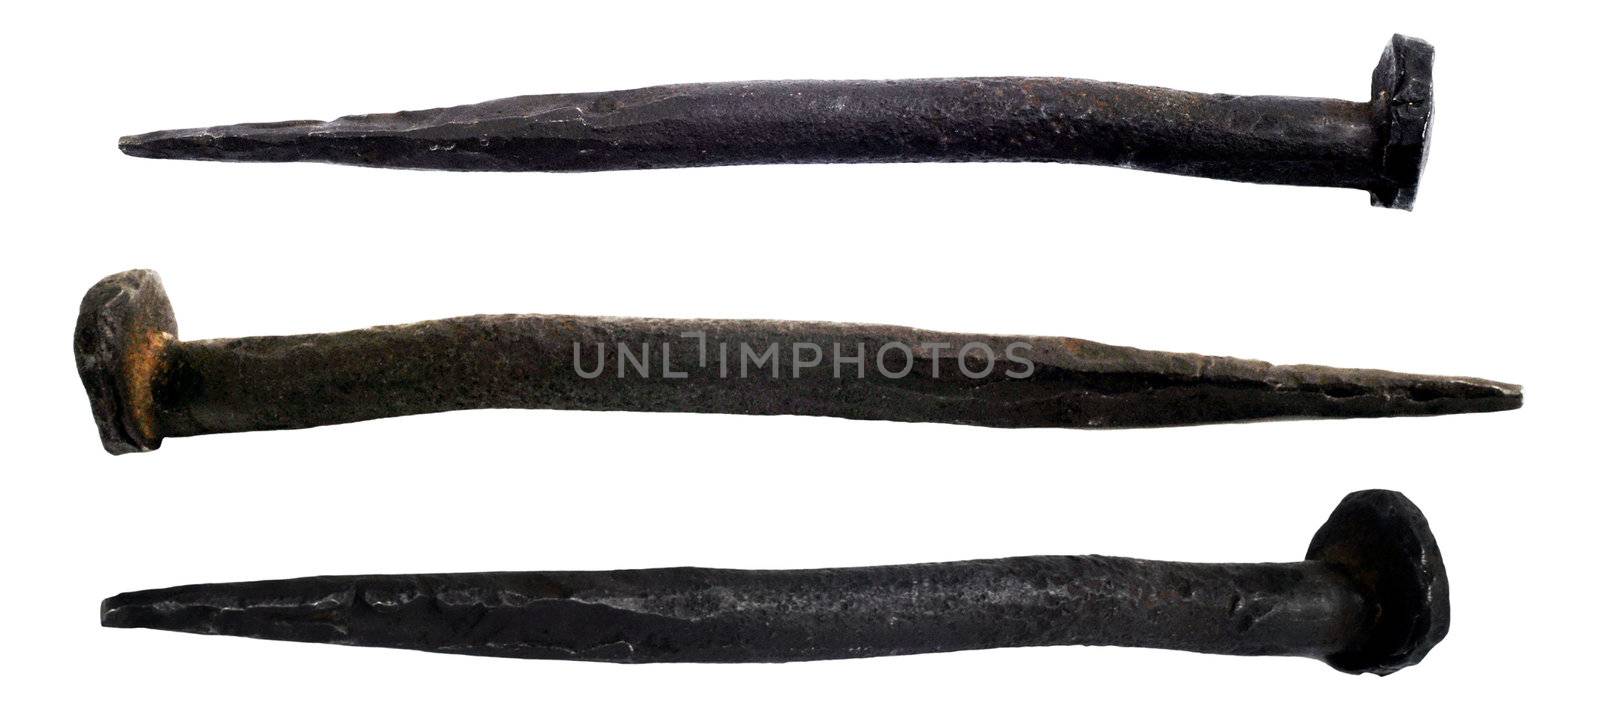 Old nails shaped manually in Siberia, Russia, in the middle of the last century